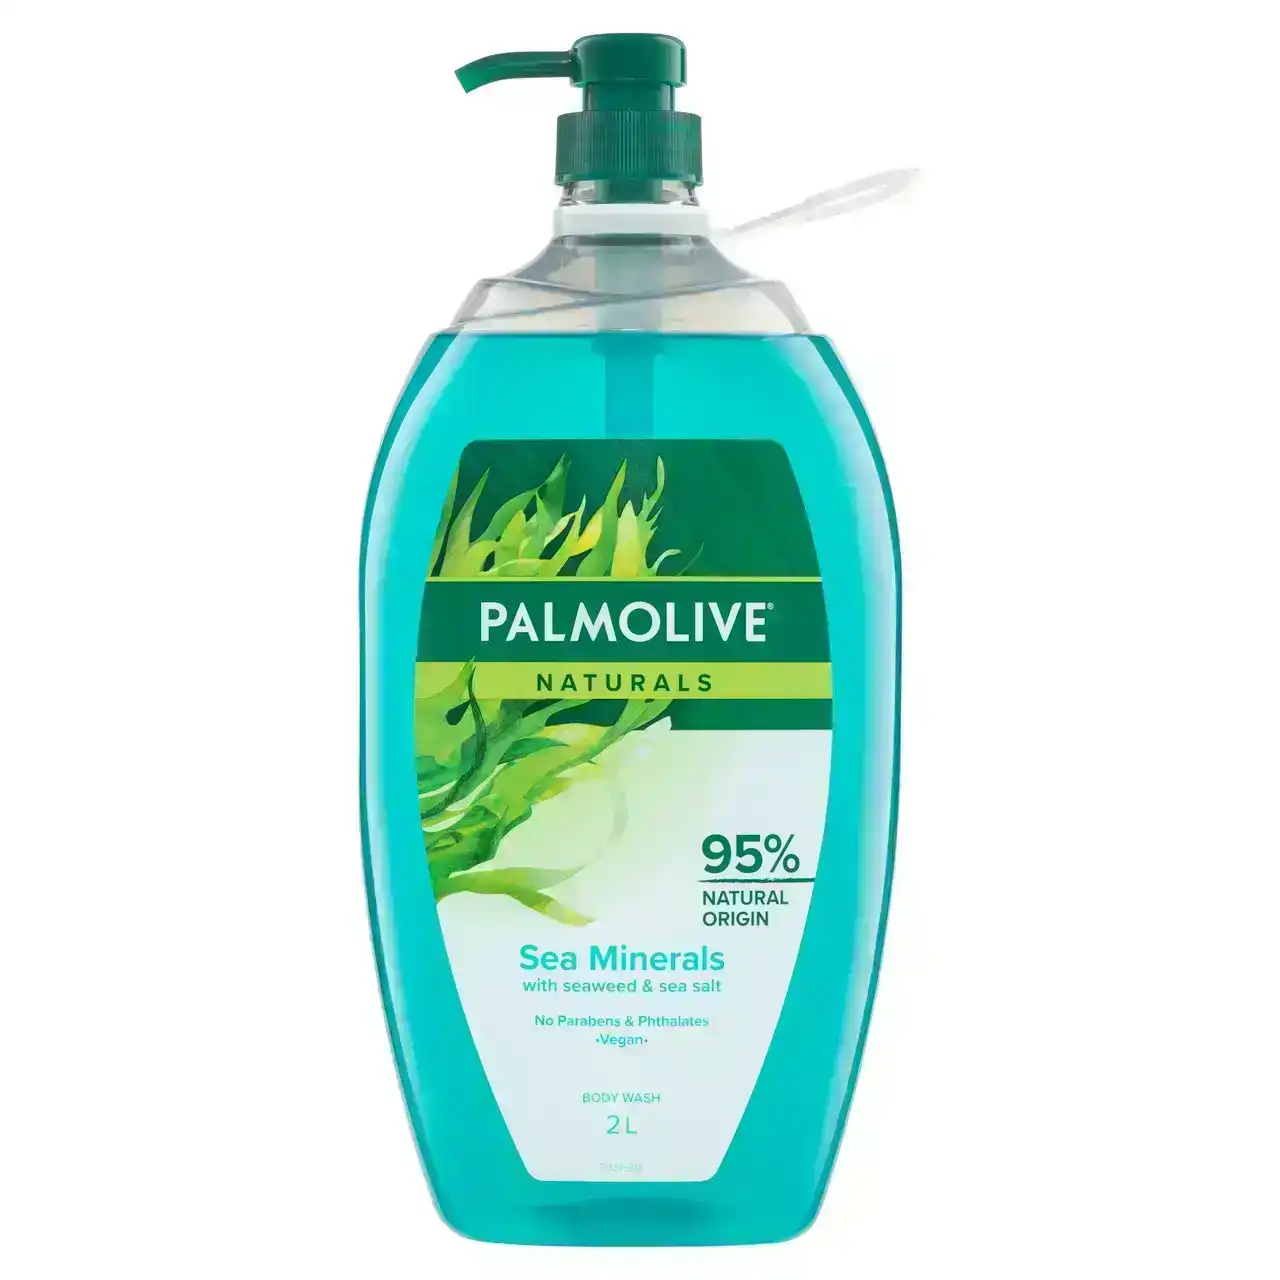 Palmolive Naturals Body Wash, 2L, Sea Minerals with Seaweed and Sea Salt, No Parabens